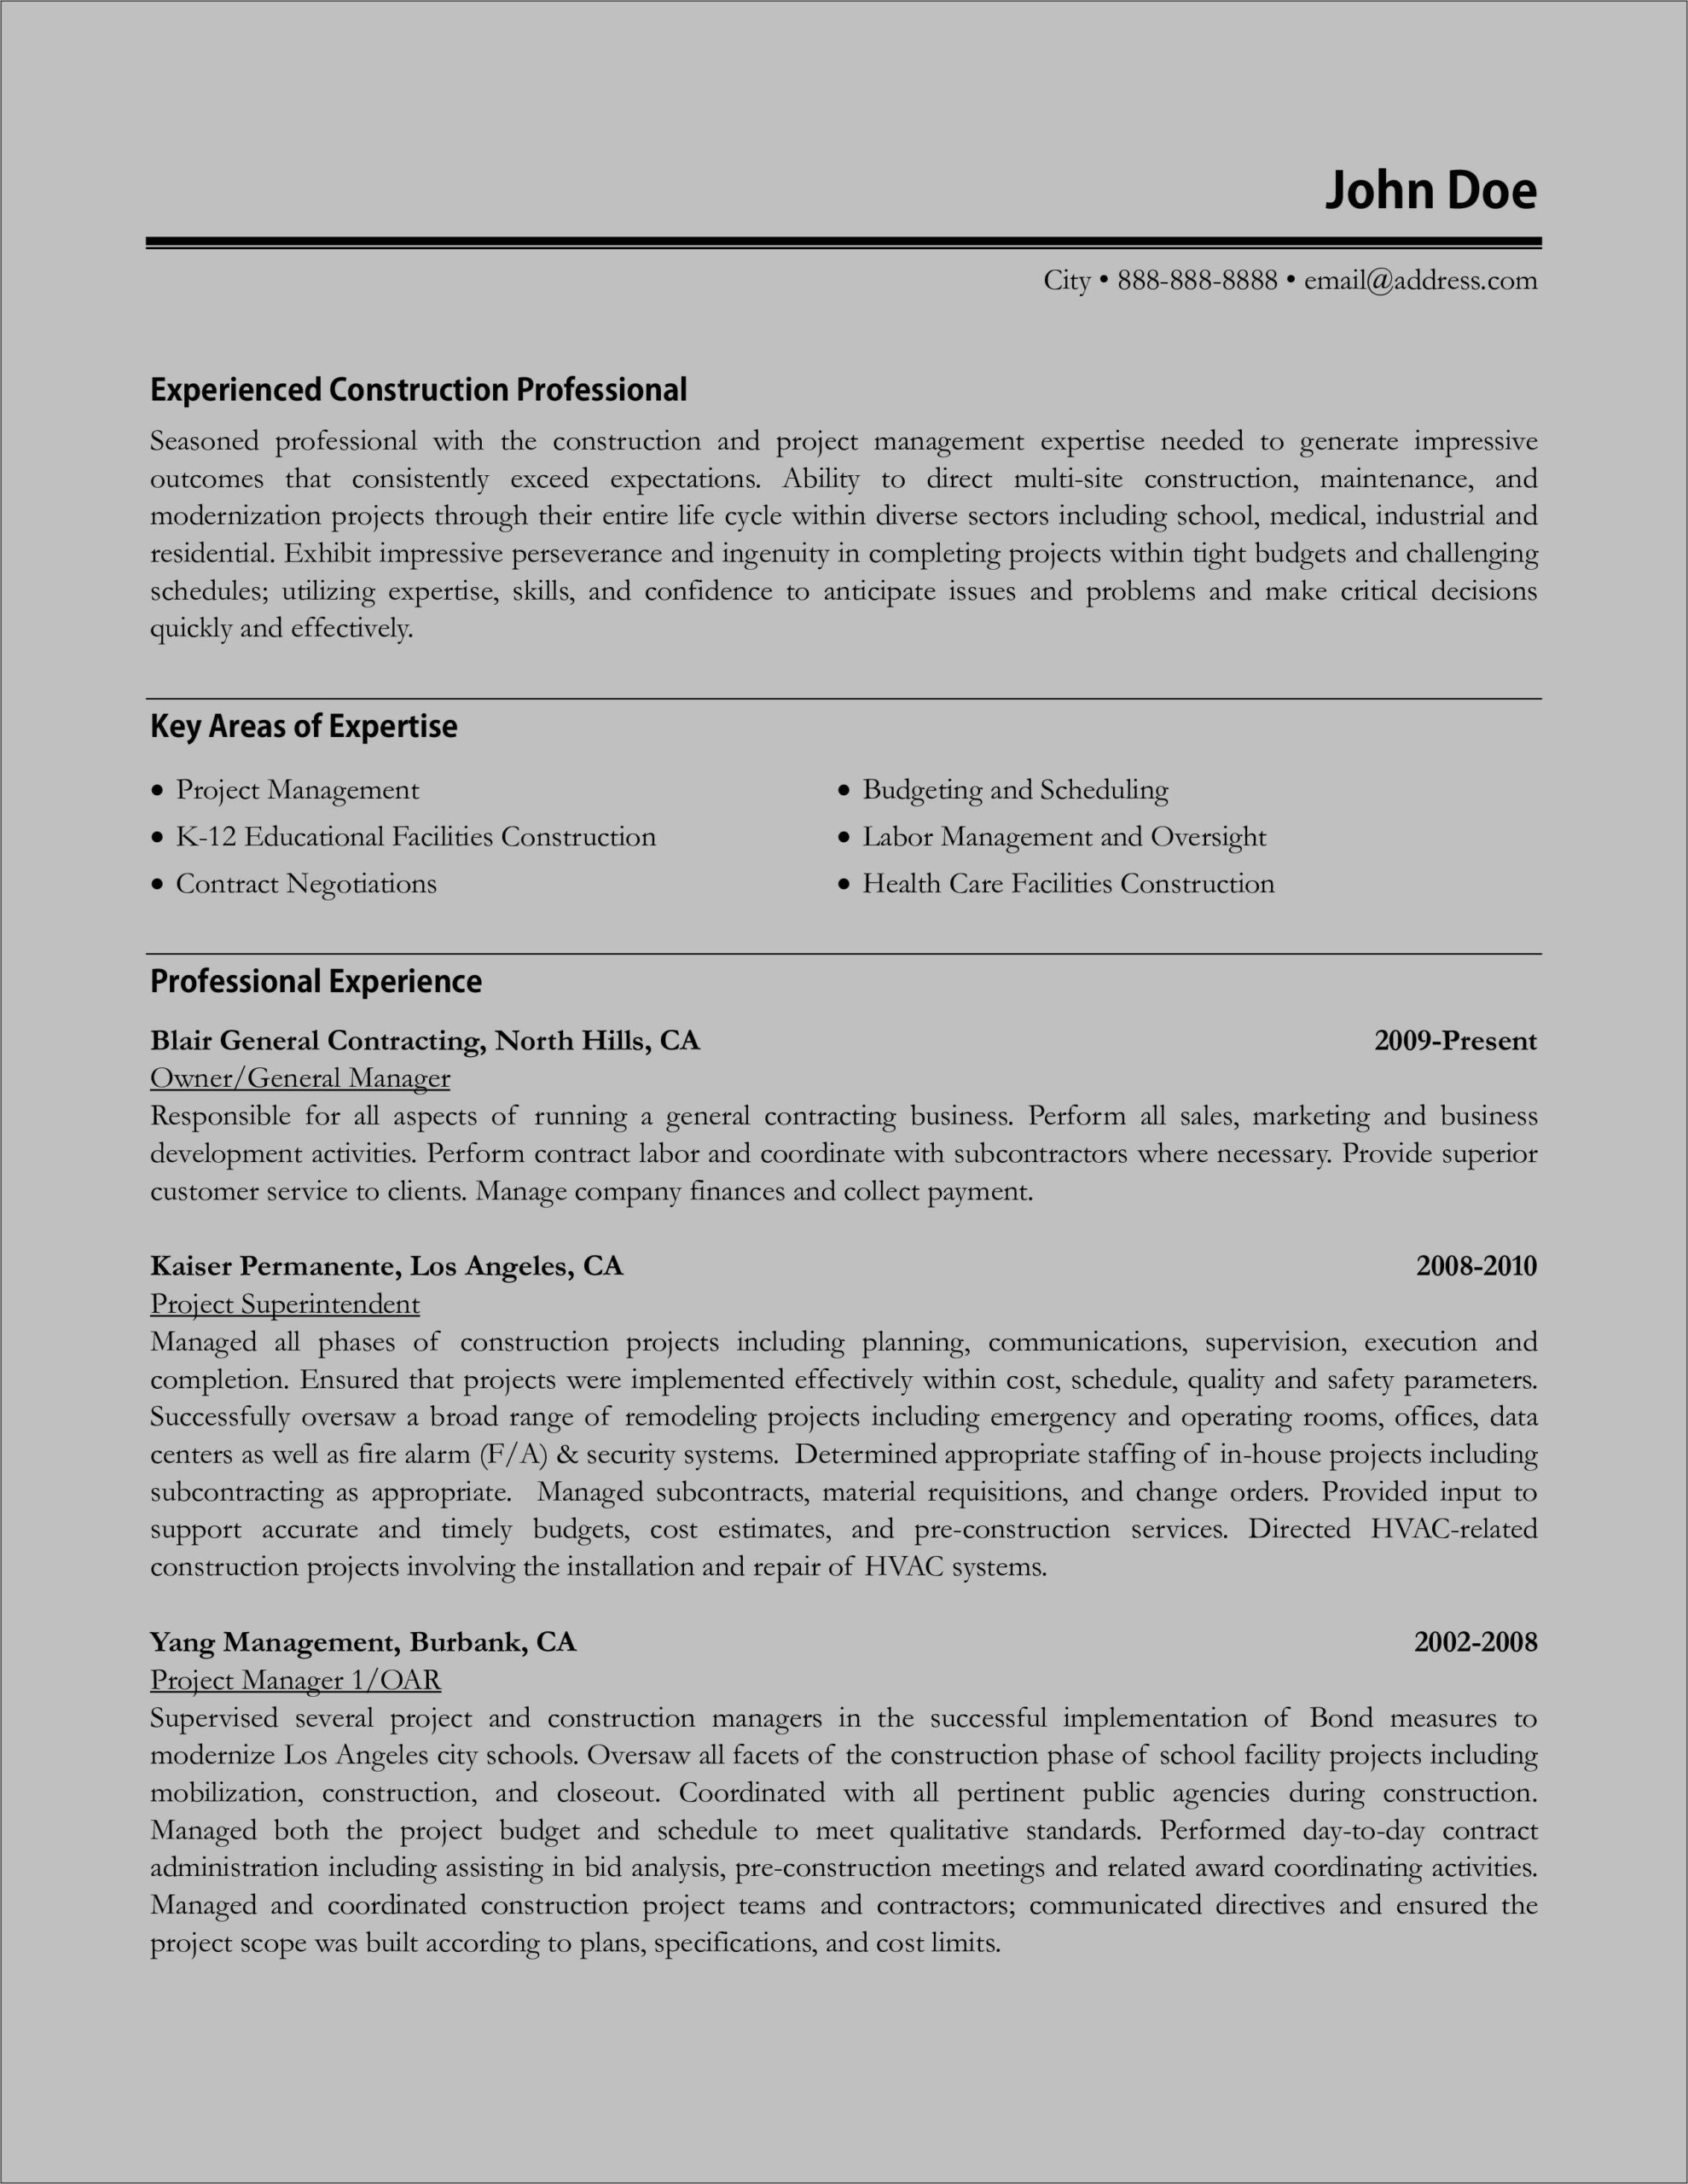 Resume Examples Health Services Administration